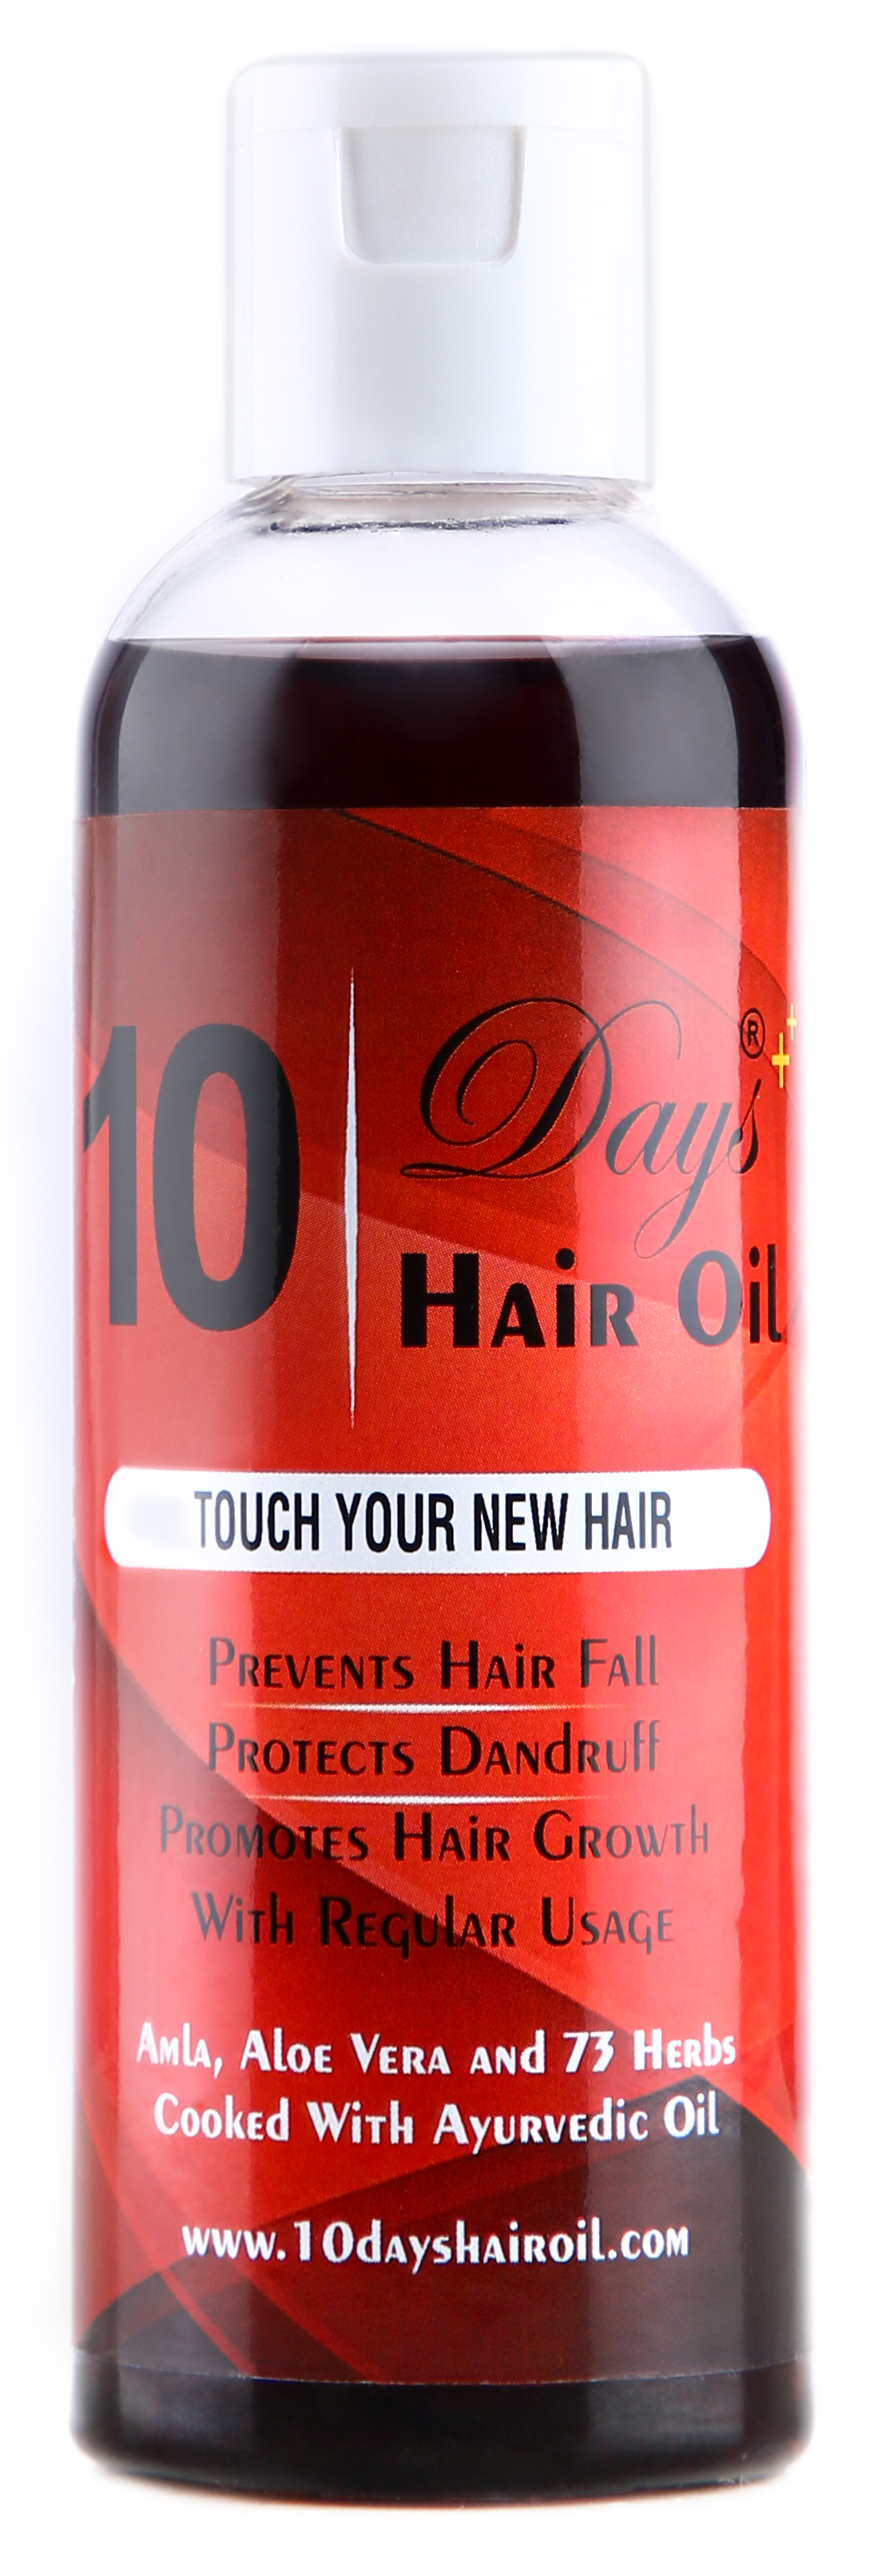 Contact Us - '10 Days' Hair Oil - Powerful Plus